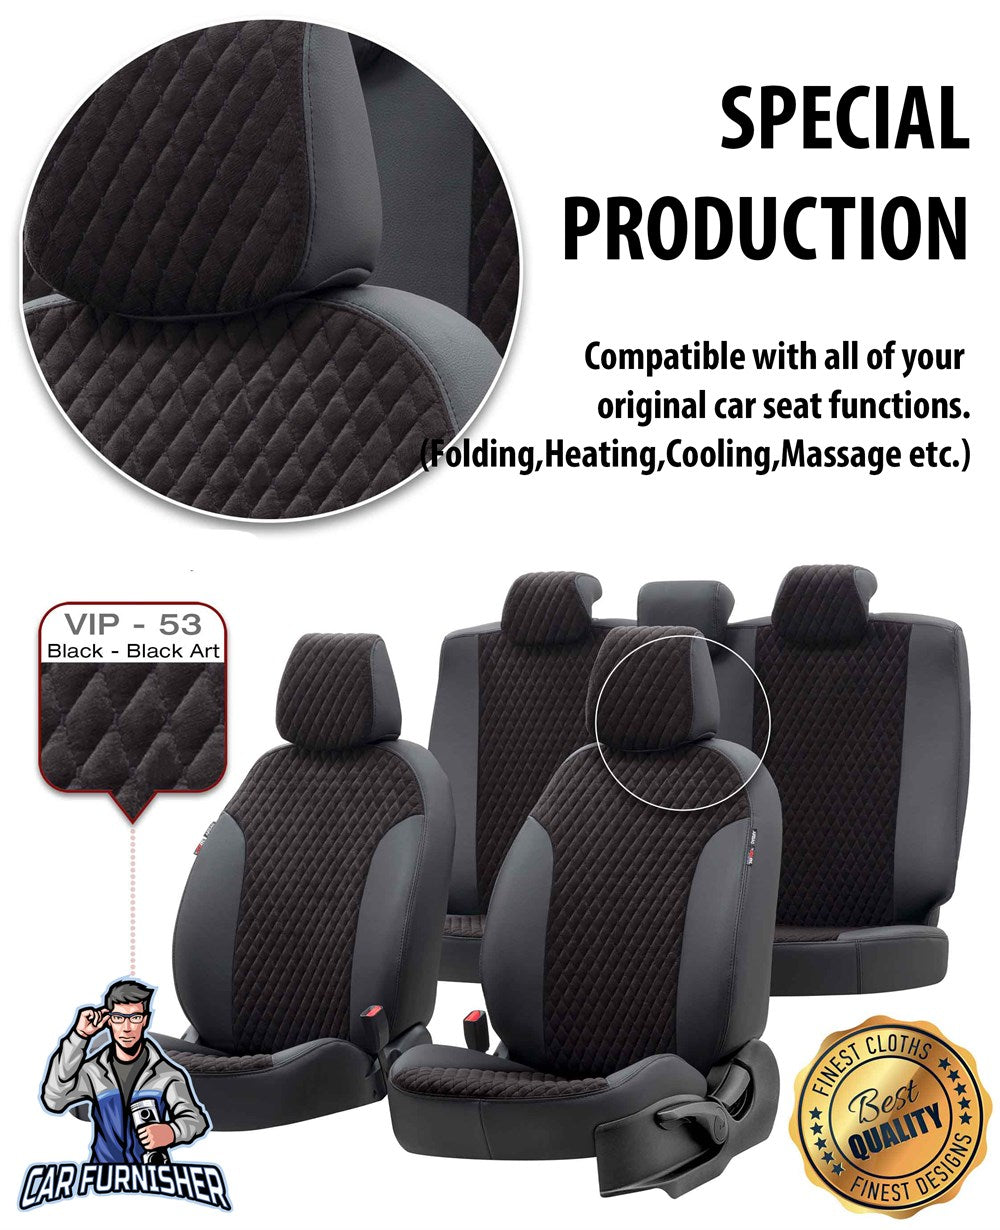 Toyota Yaris Seat Cover Amsterdam Foal Feather Design Dark Gray Leather & Foal Feather